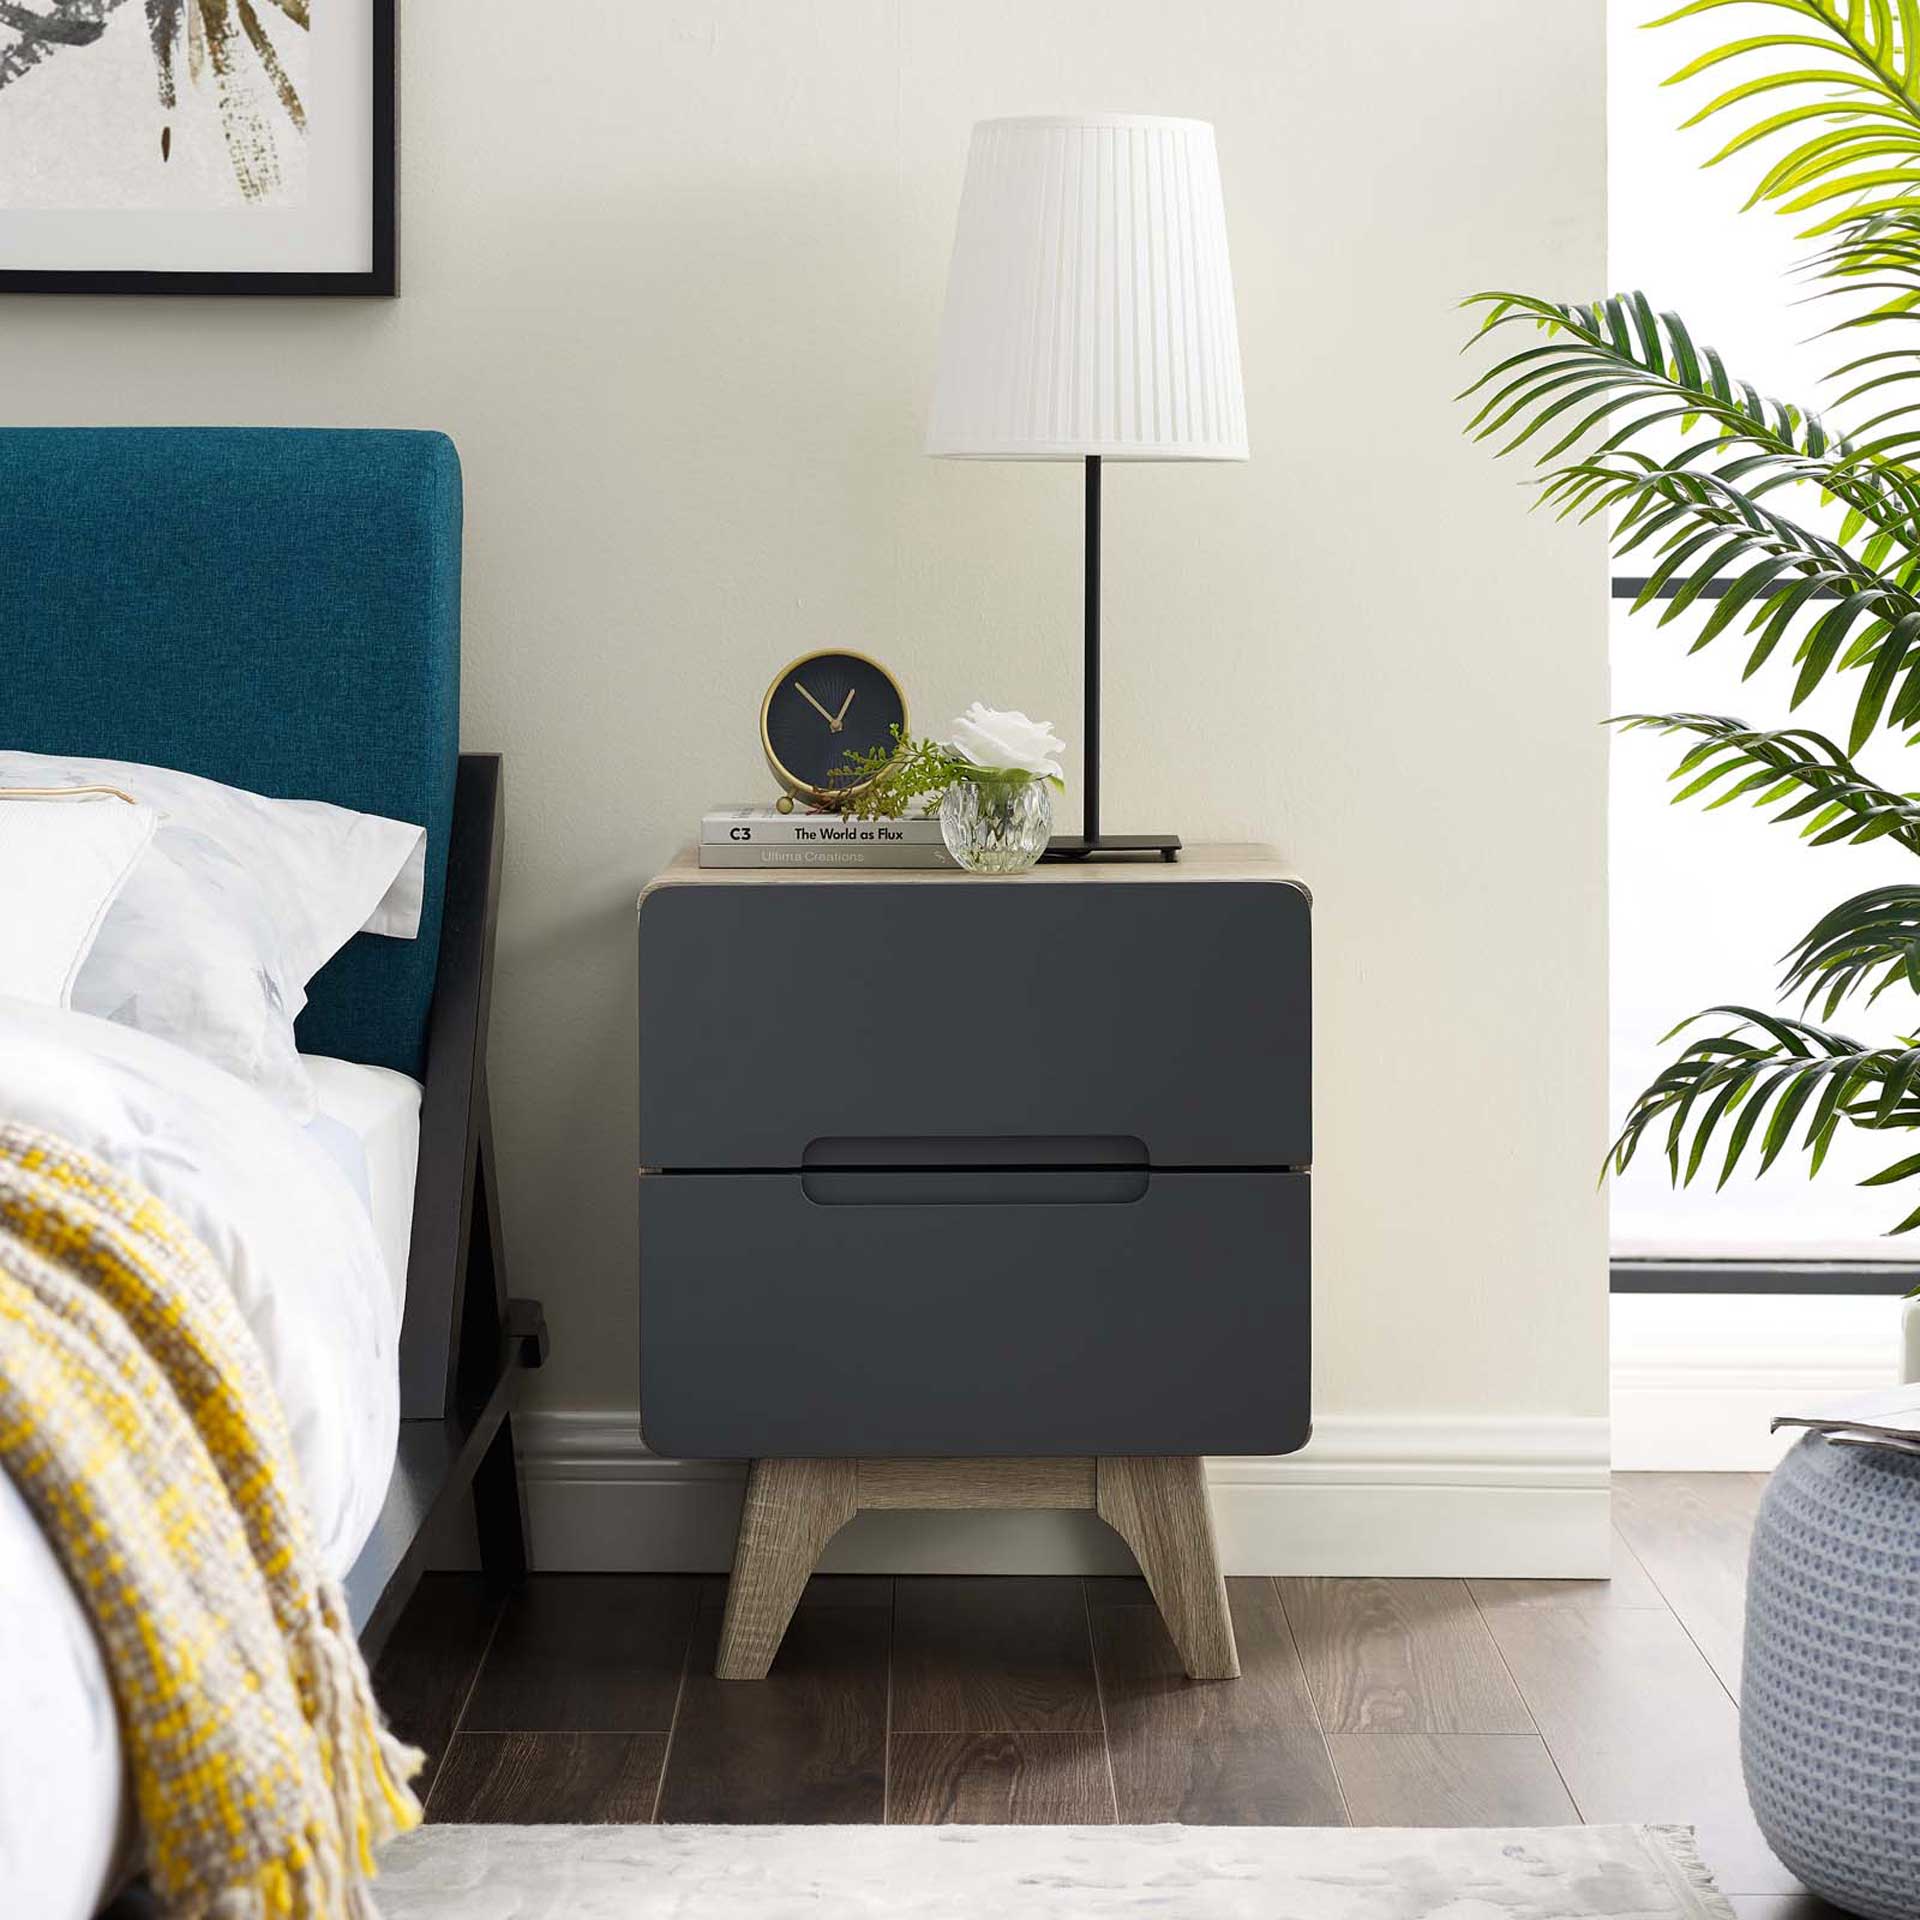 Orion Wood Nightstand Natural Gray